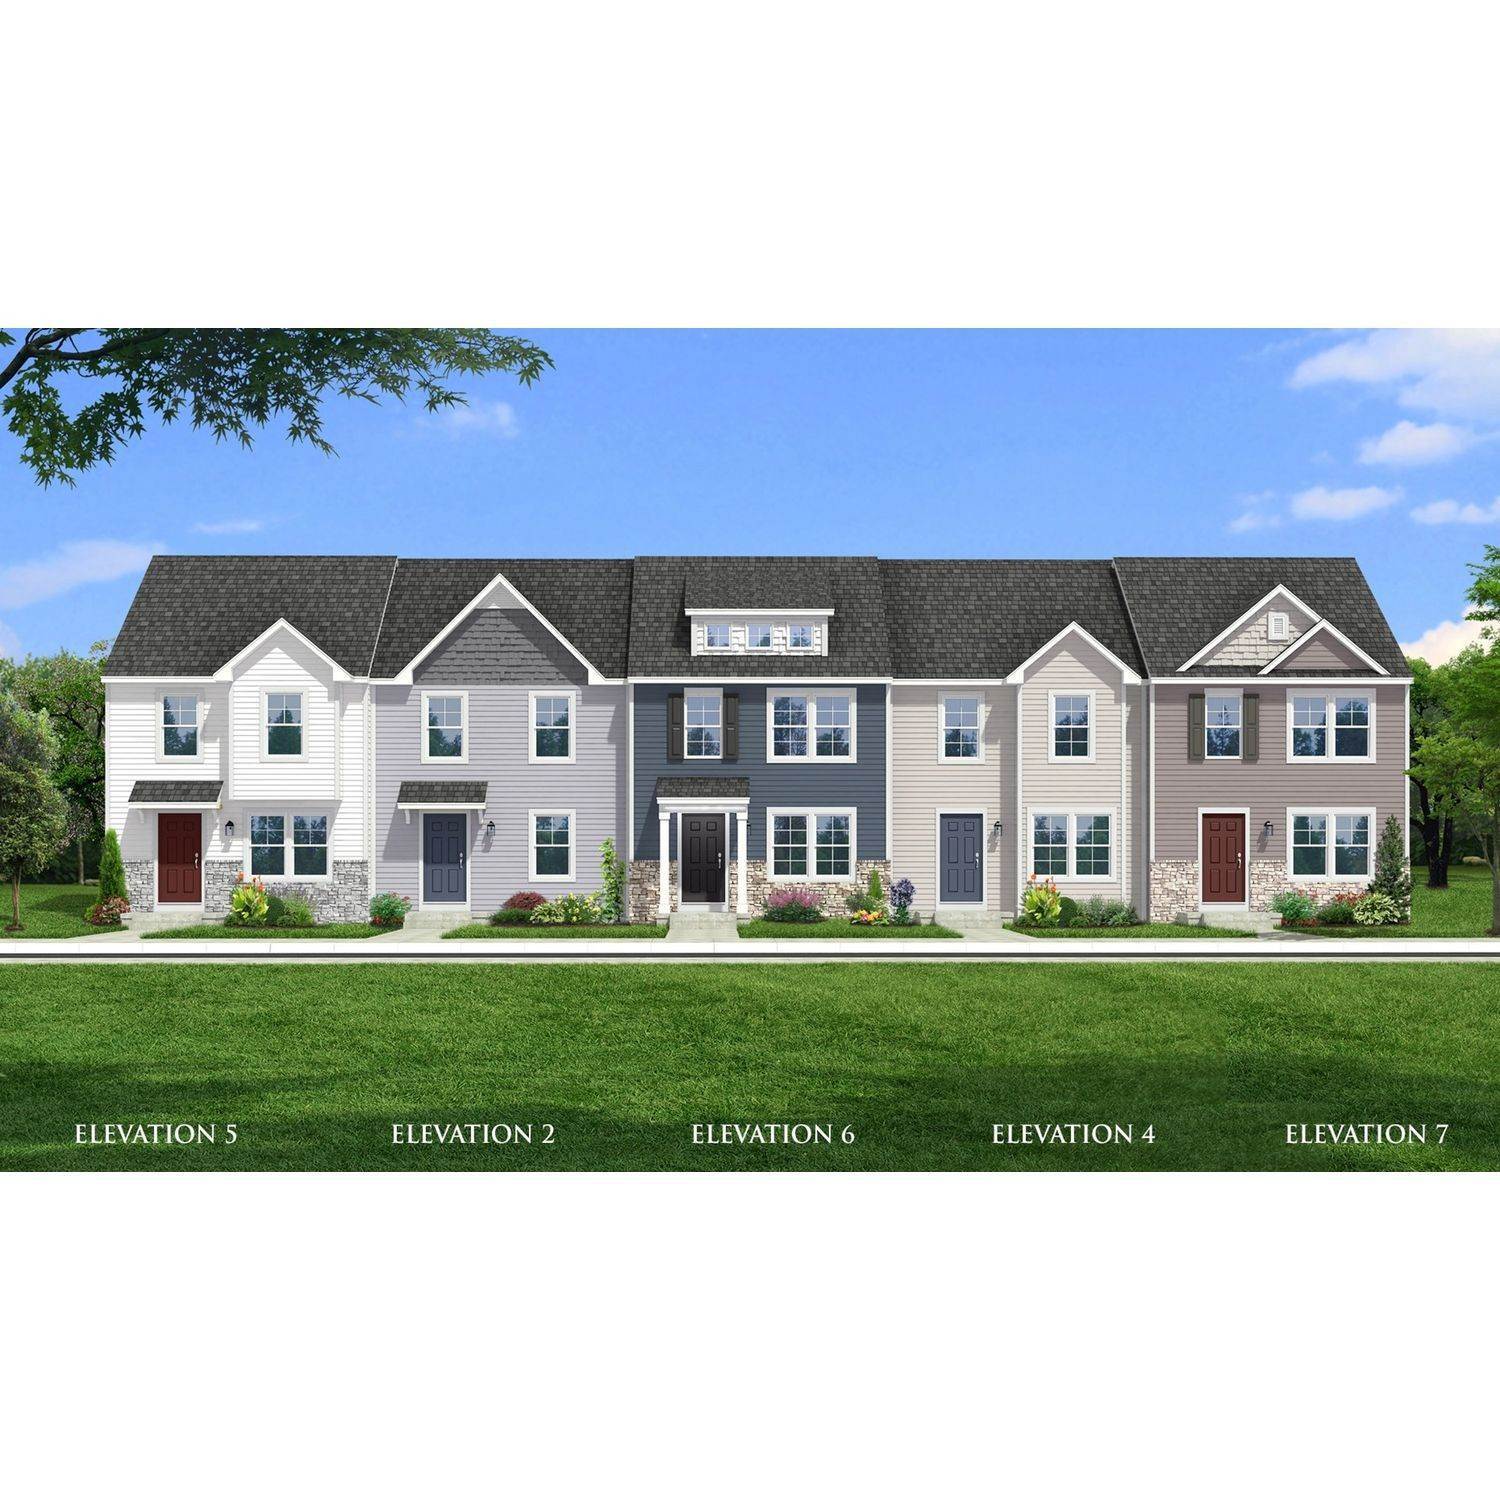 6. Whispering Pines Townhomes building at 16 Loblolly Drive, Bunker Hill, WV 25413